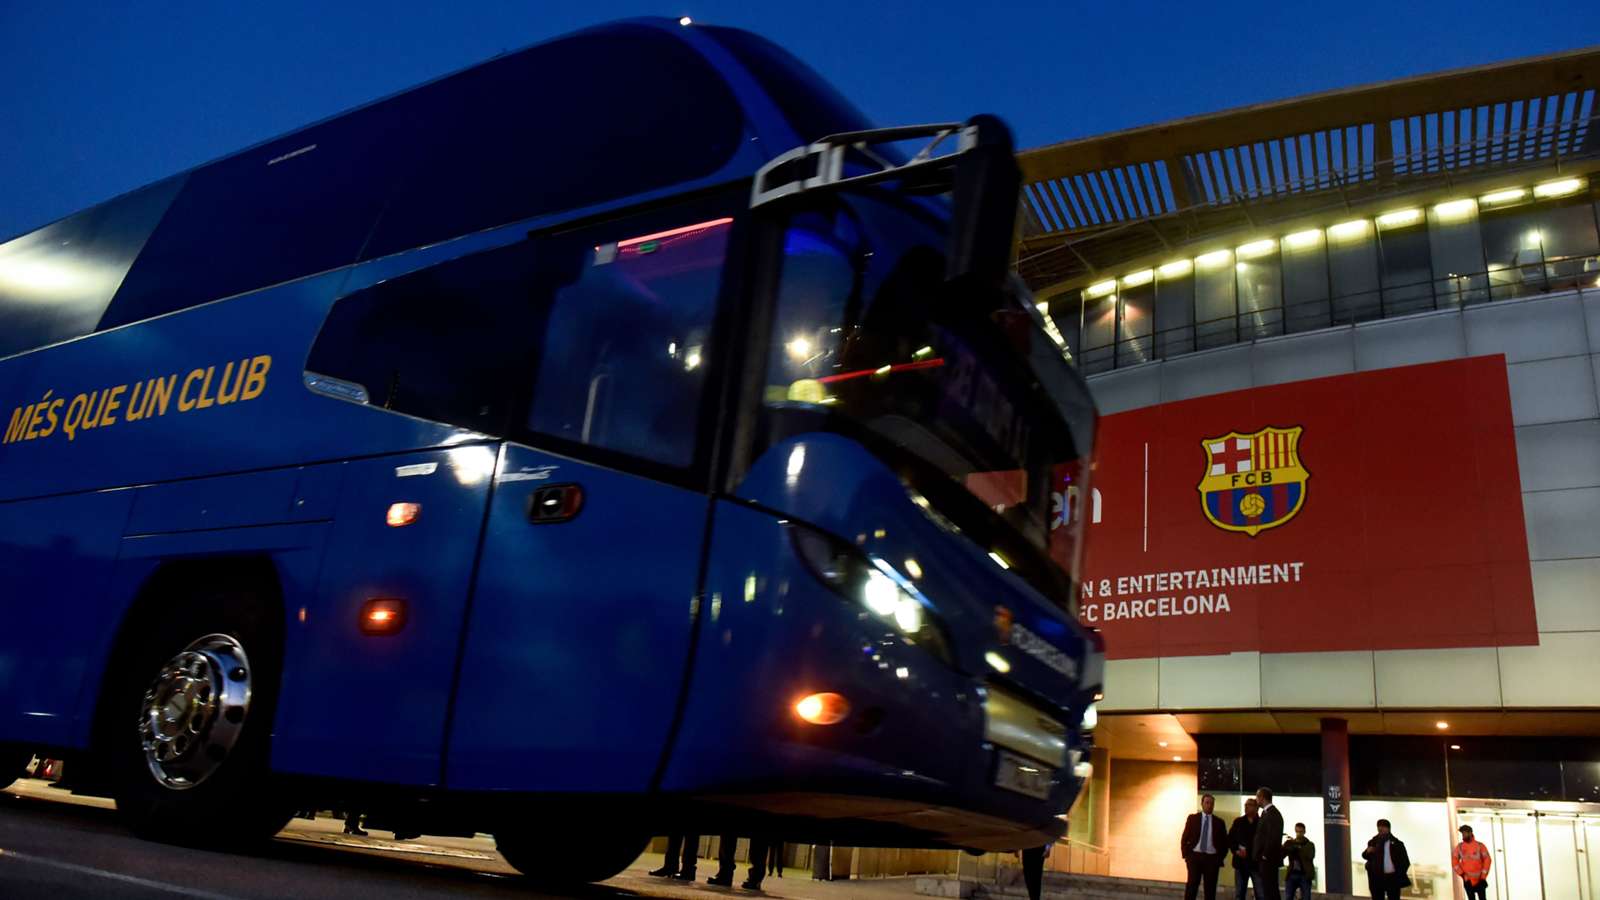 The Catalans Had To Delay Their Media Commitments Due - Barcelona Bus In Saudi Arabia - HD Wallpaper 